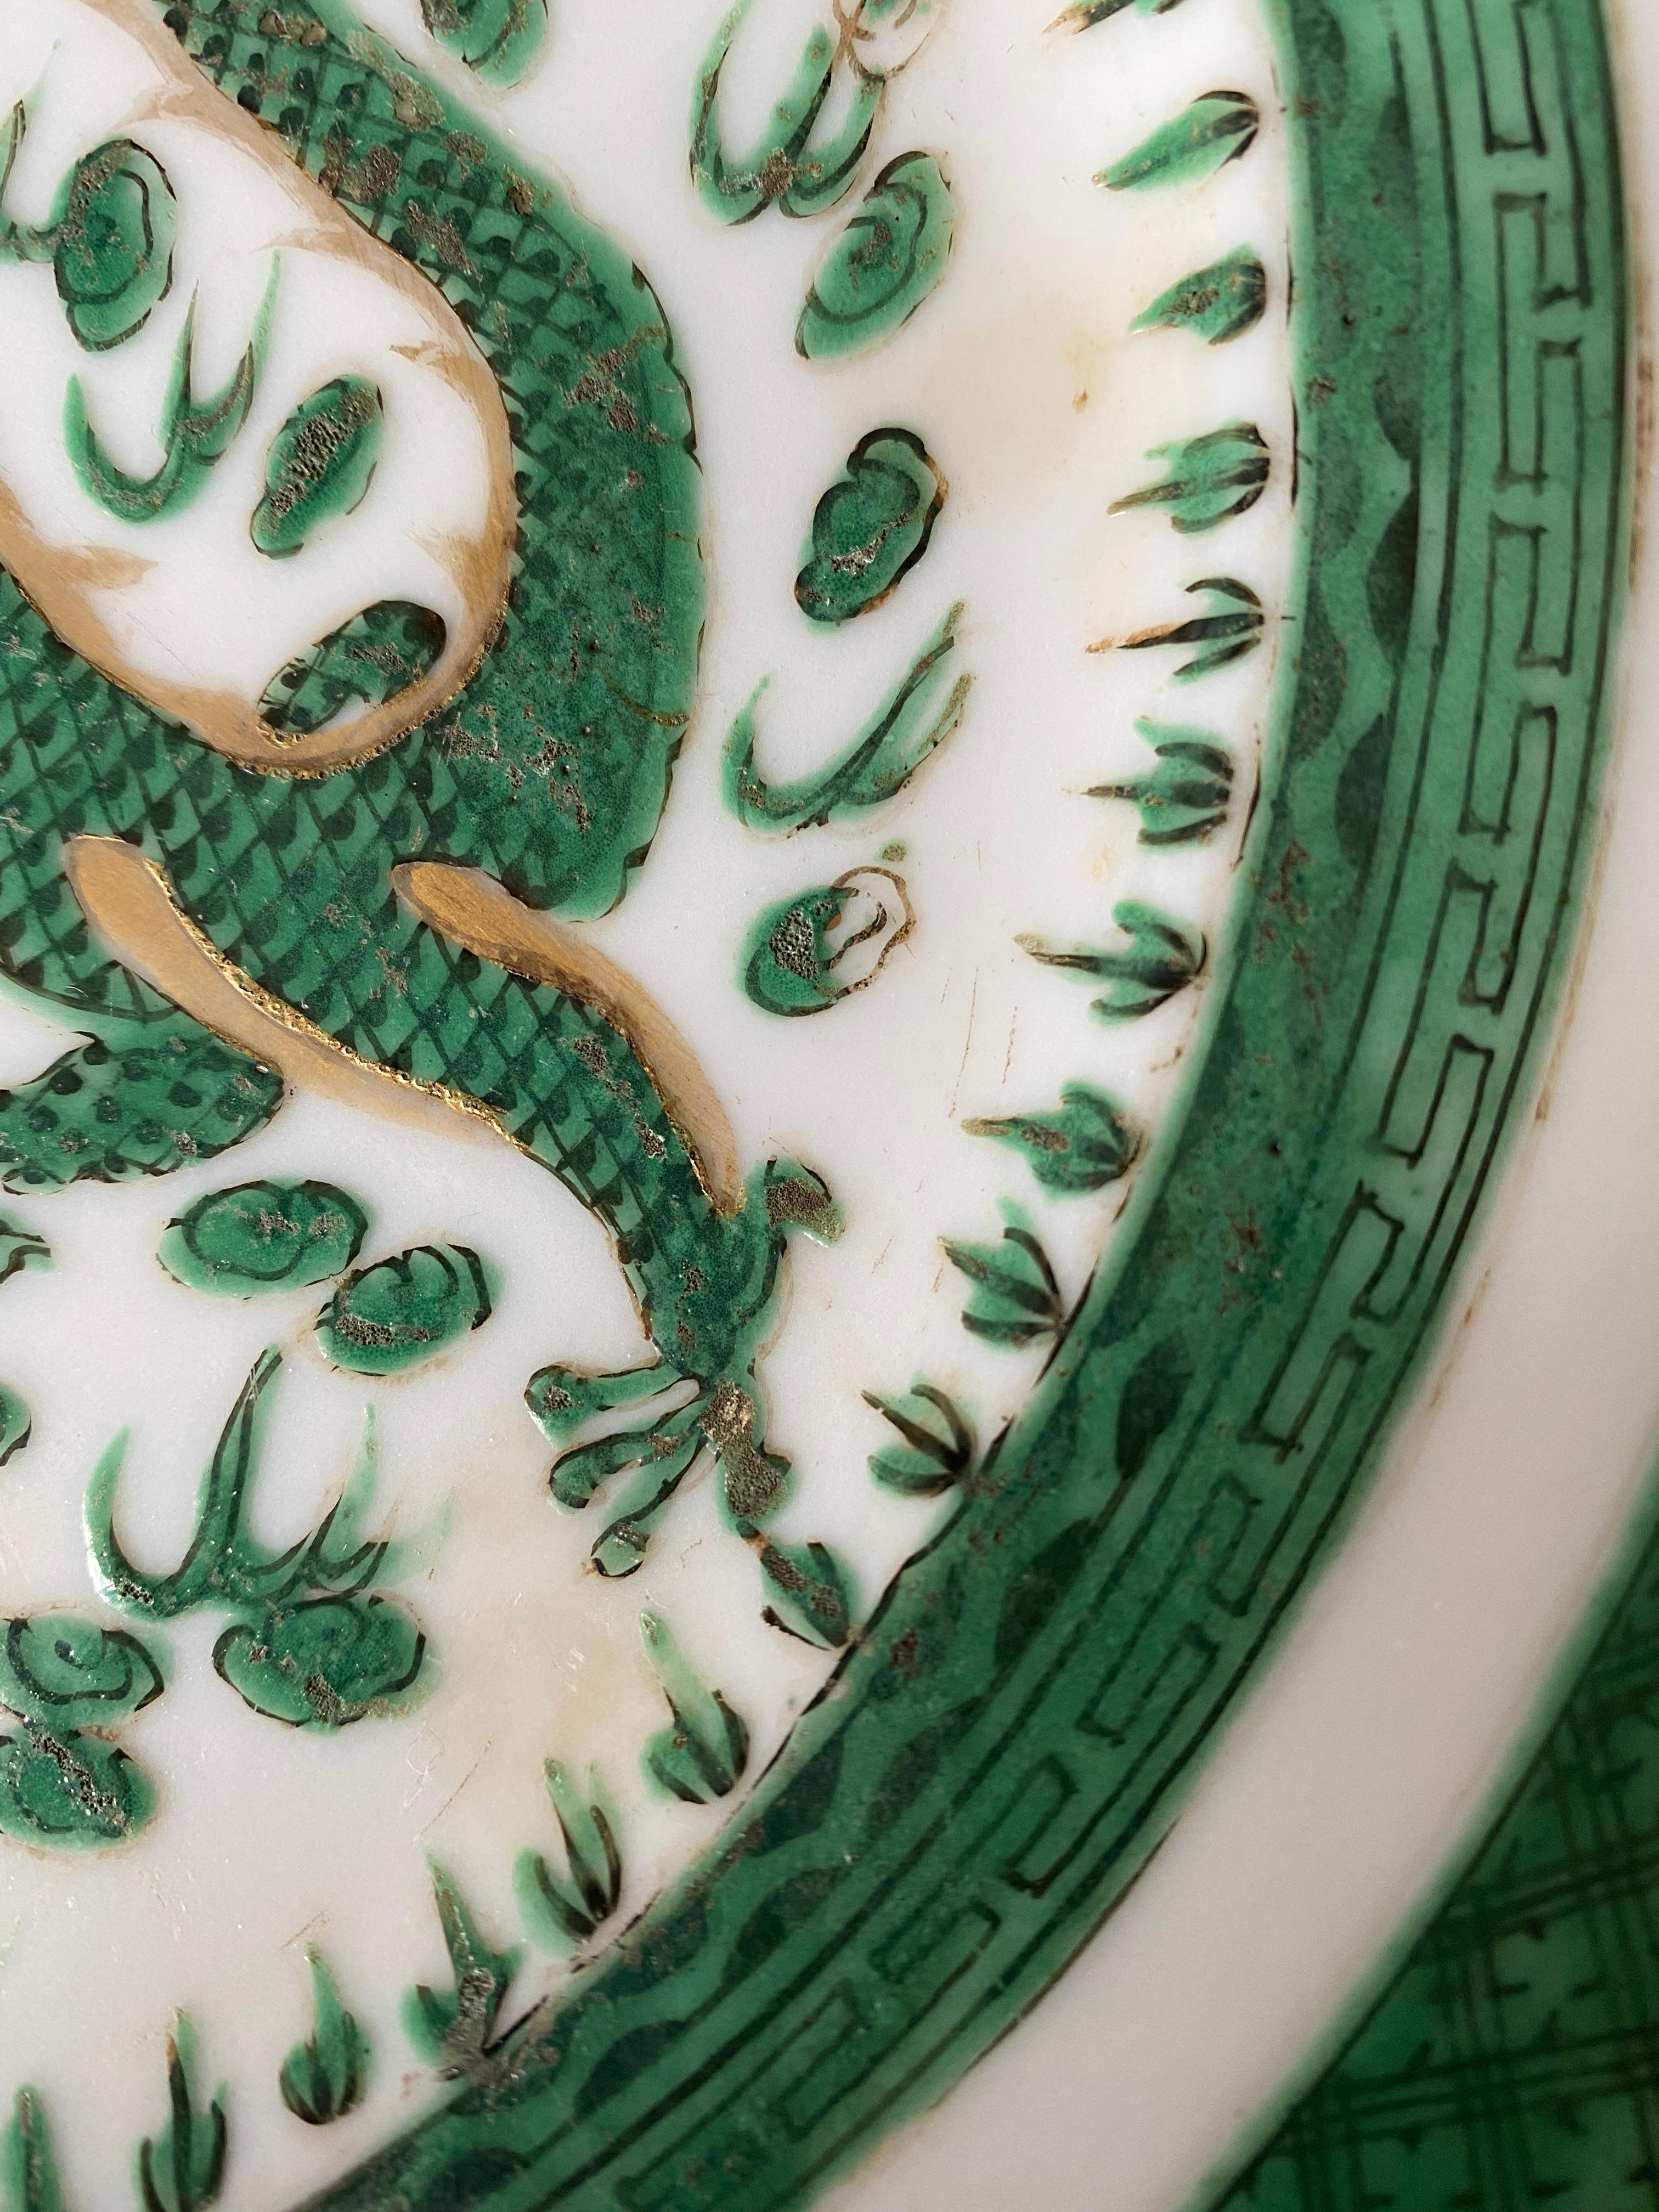 Ceramic Chinese Porcelain Plate with Dragon Decoration 